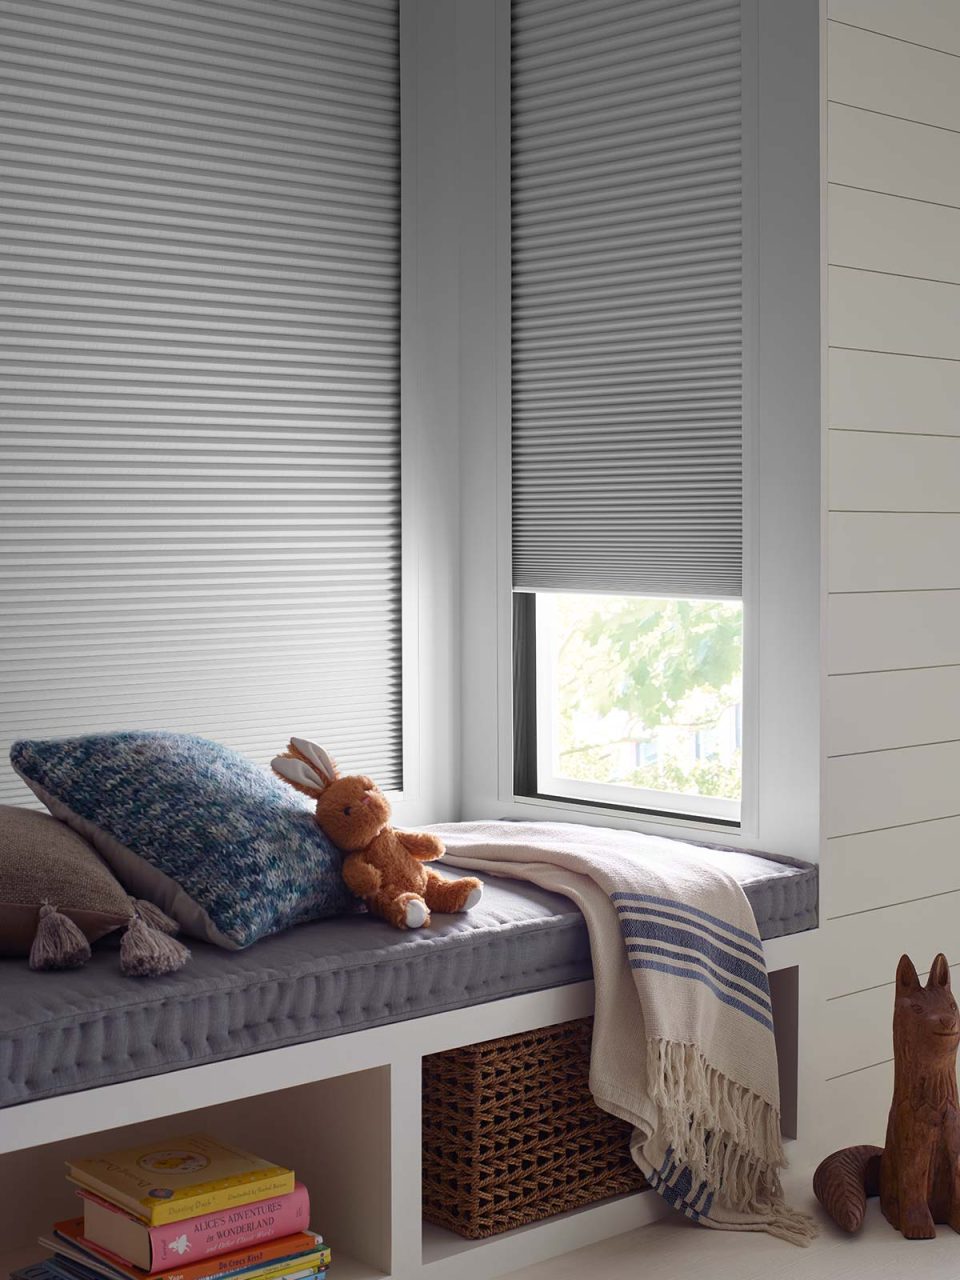 Hunter Douglas Honeycomb Shade with LightLock Operating System during the day